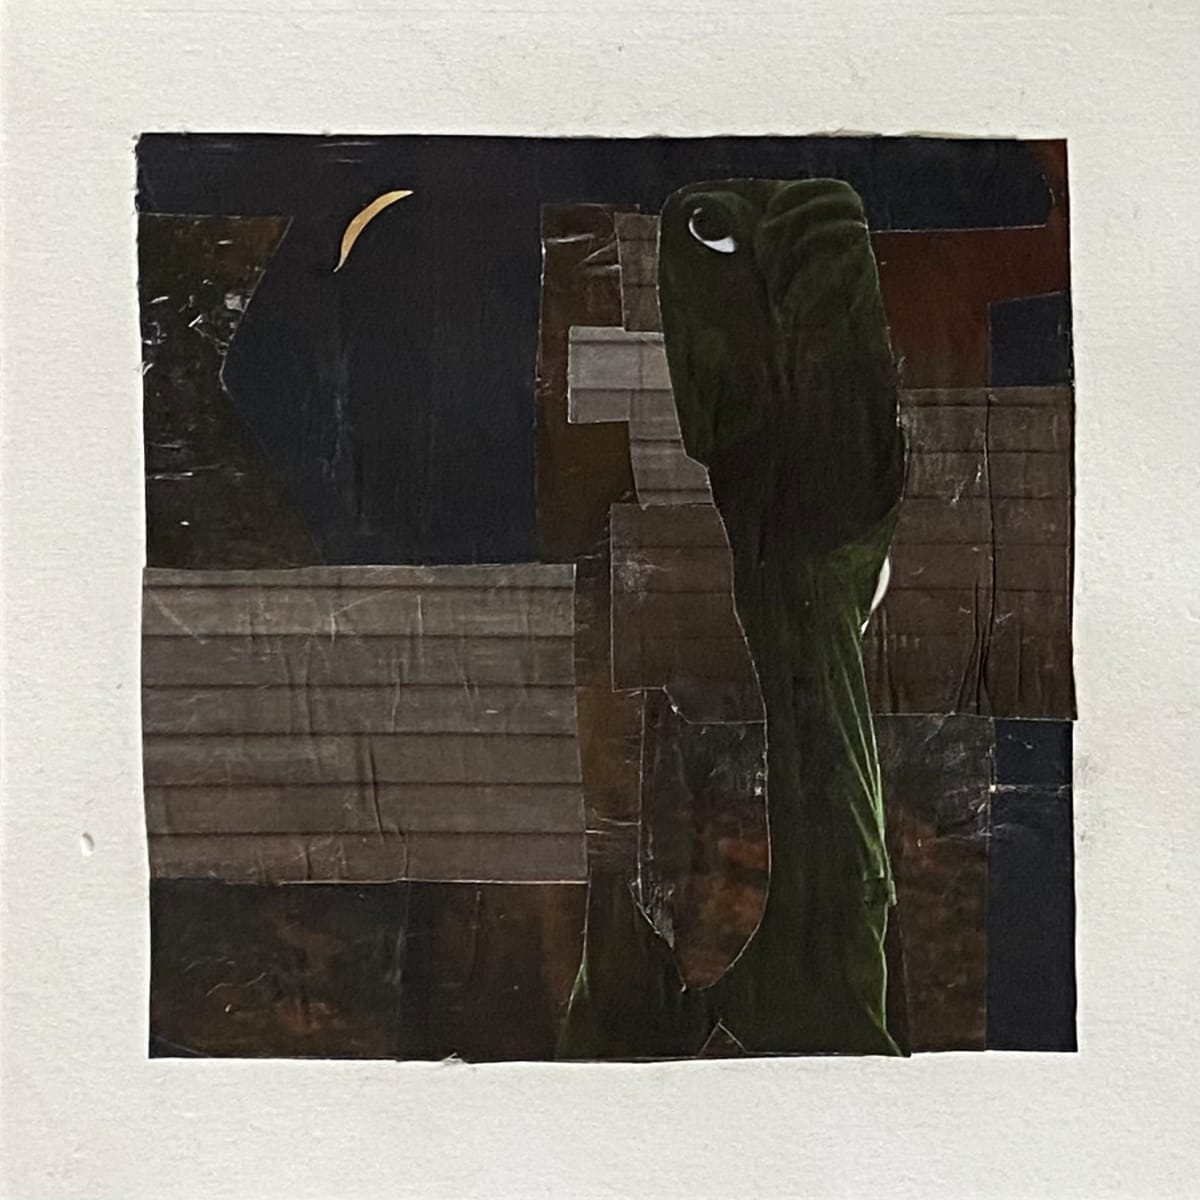 6b-In the dark of the night, 2020, Collage on paper, 6 x 6 inches. Unframed by Juanita 